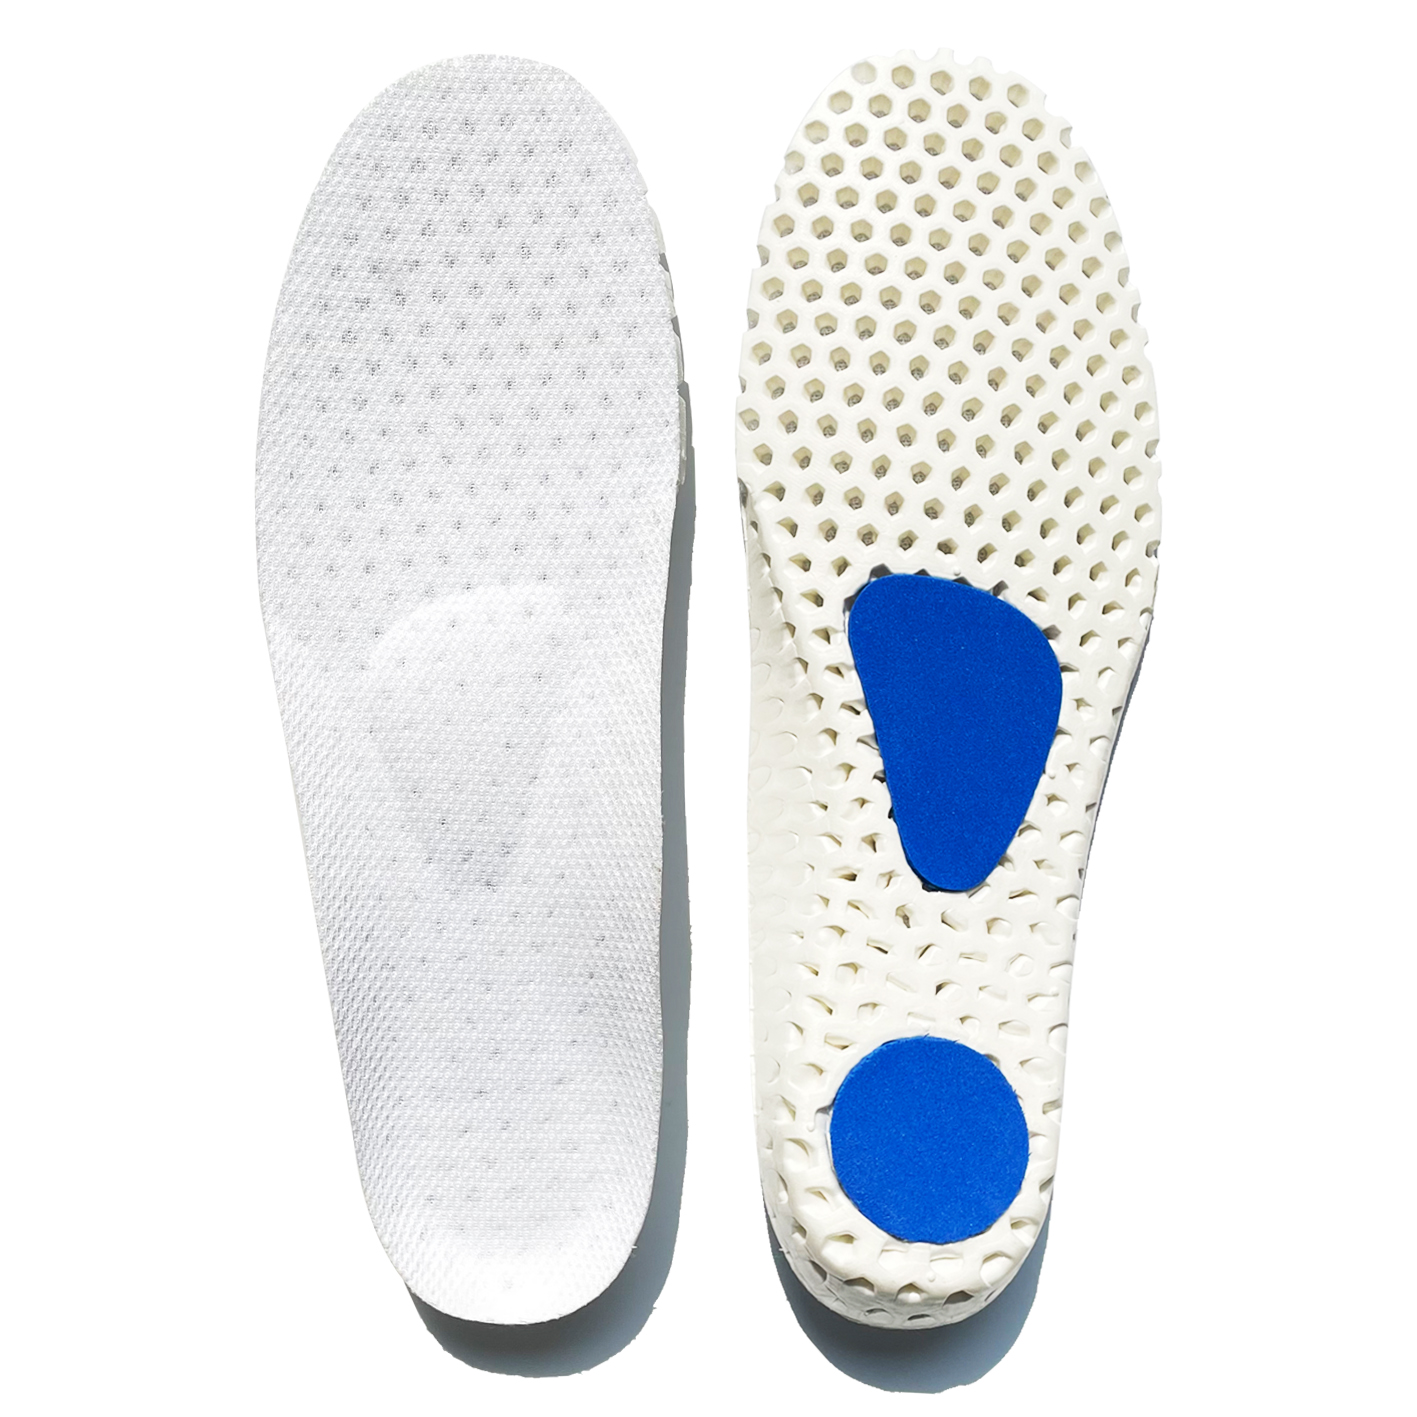 Custom quick dry breathable soft EVA foot fatigue pain relief sports sneakers insoles Featured Image